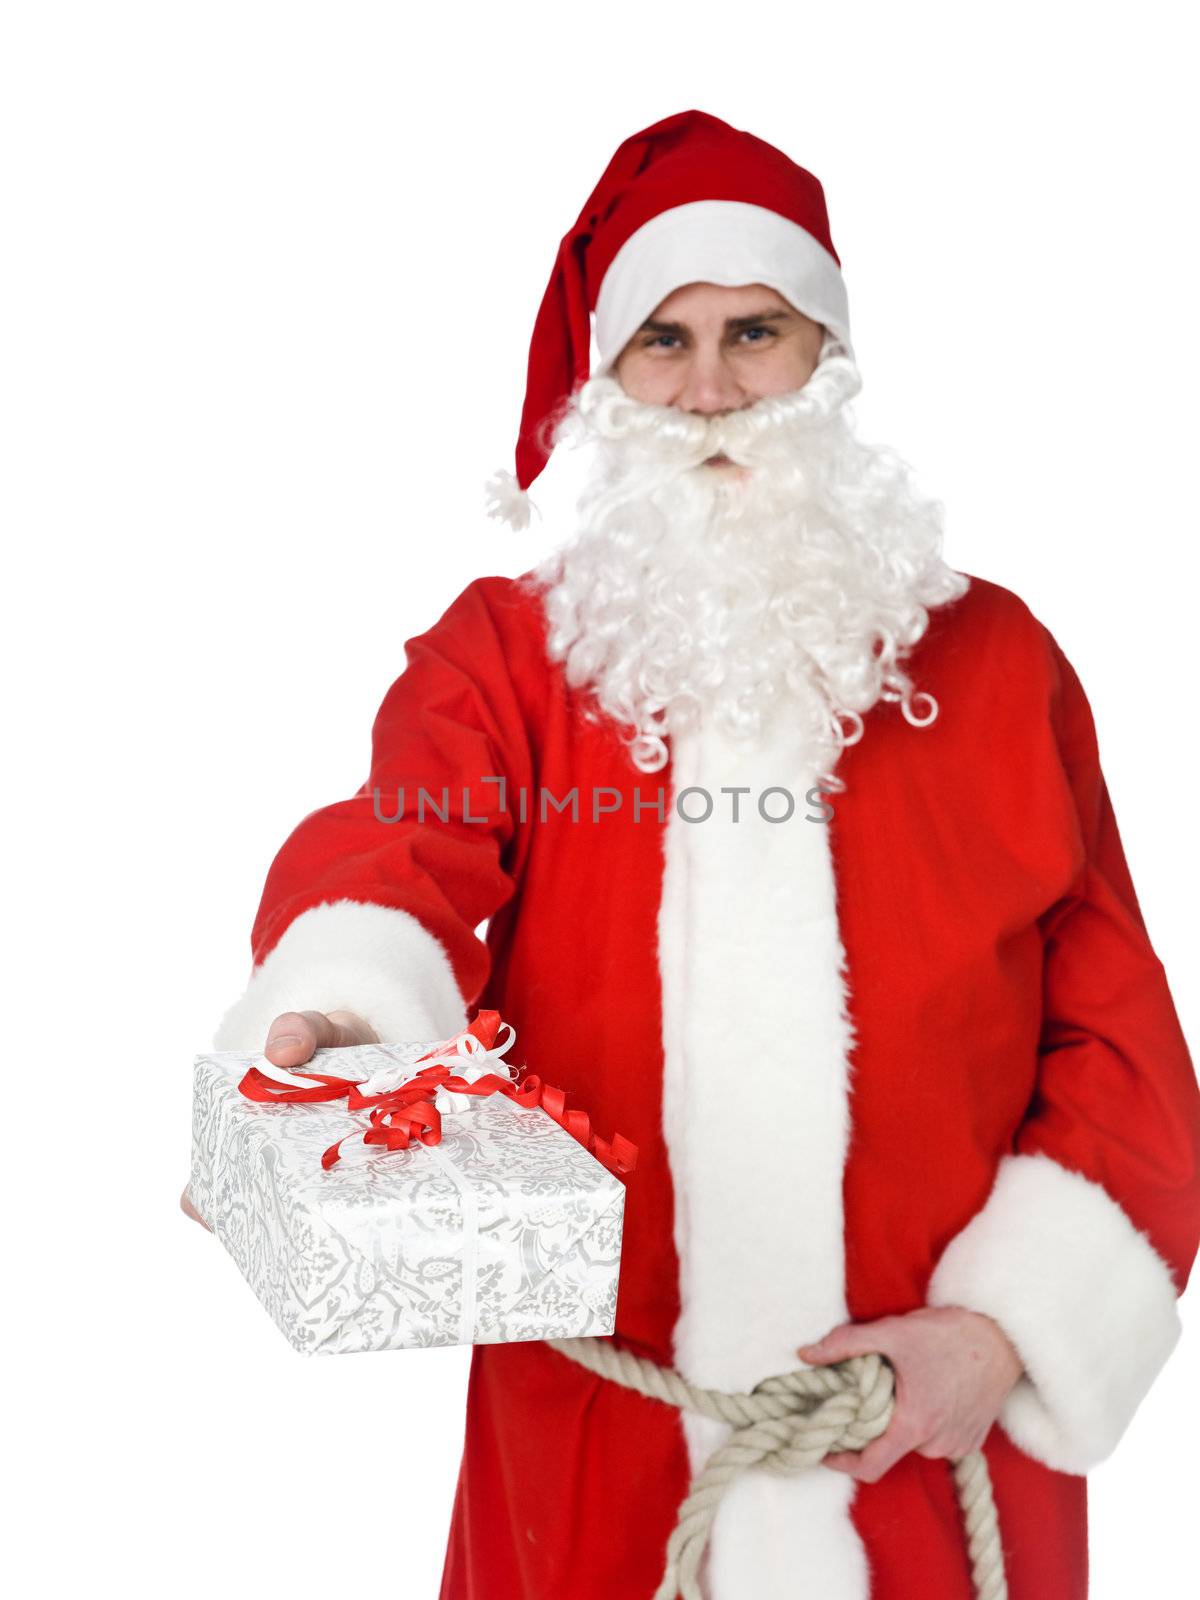 Santa claus is offering a gift isolated on white